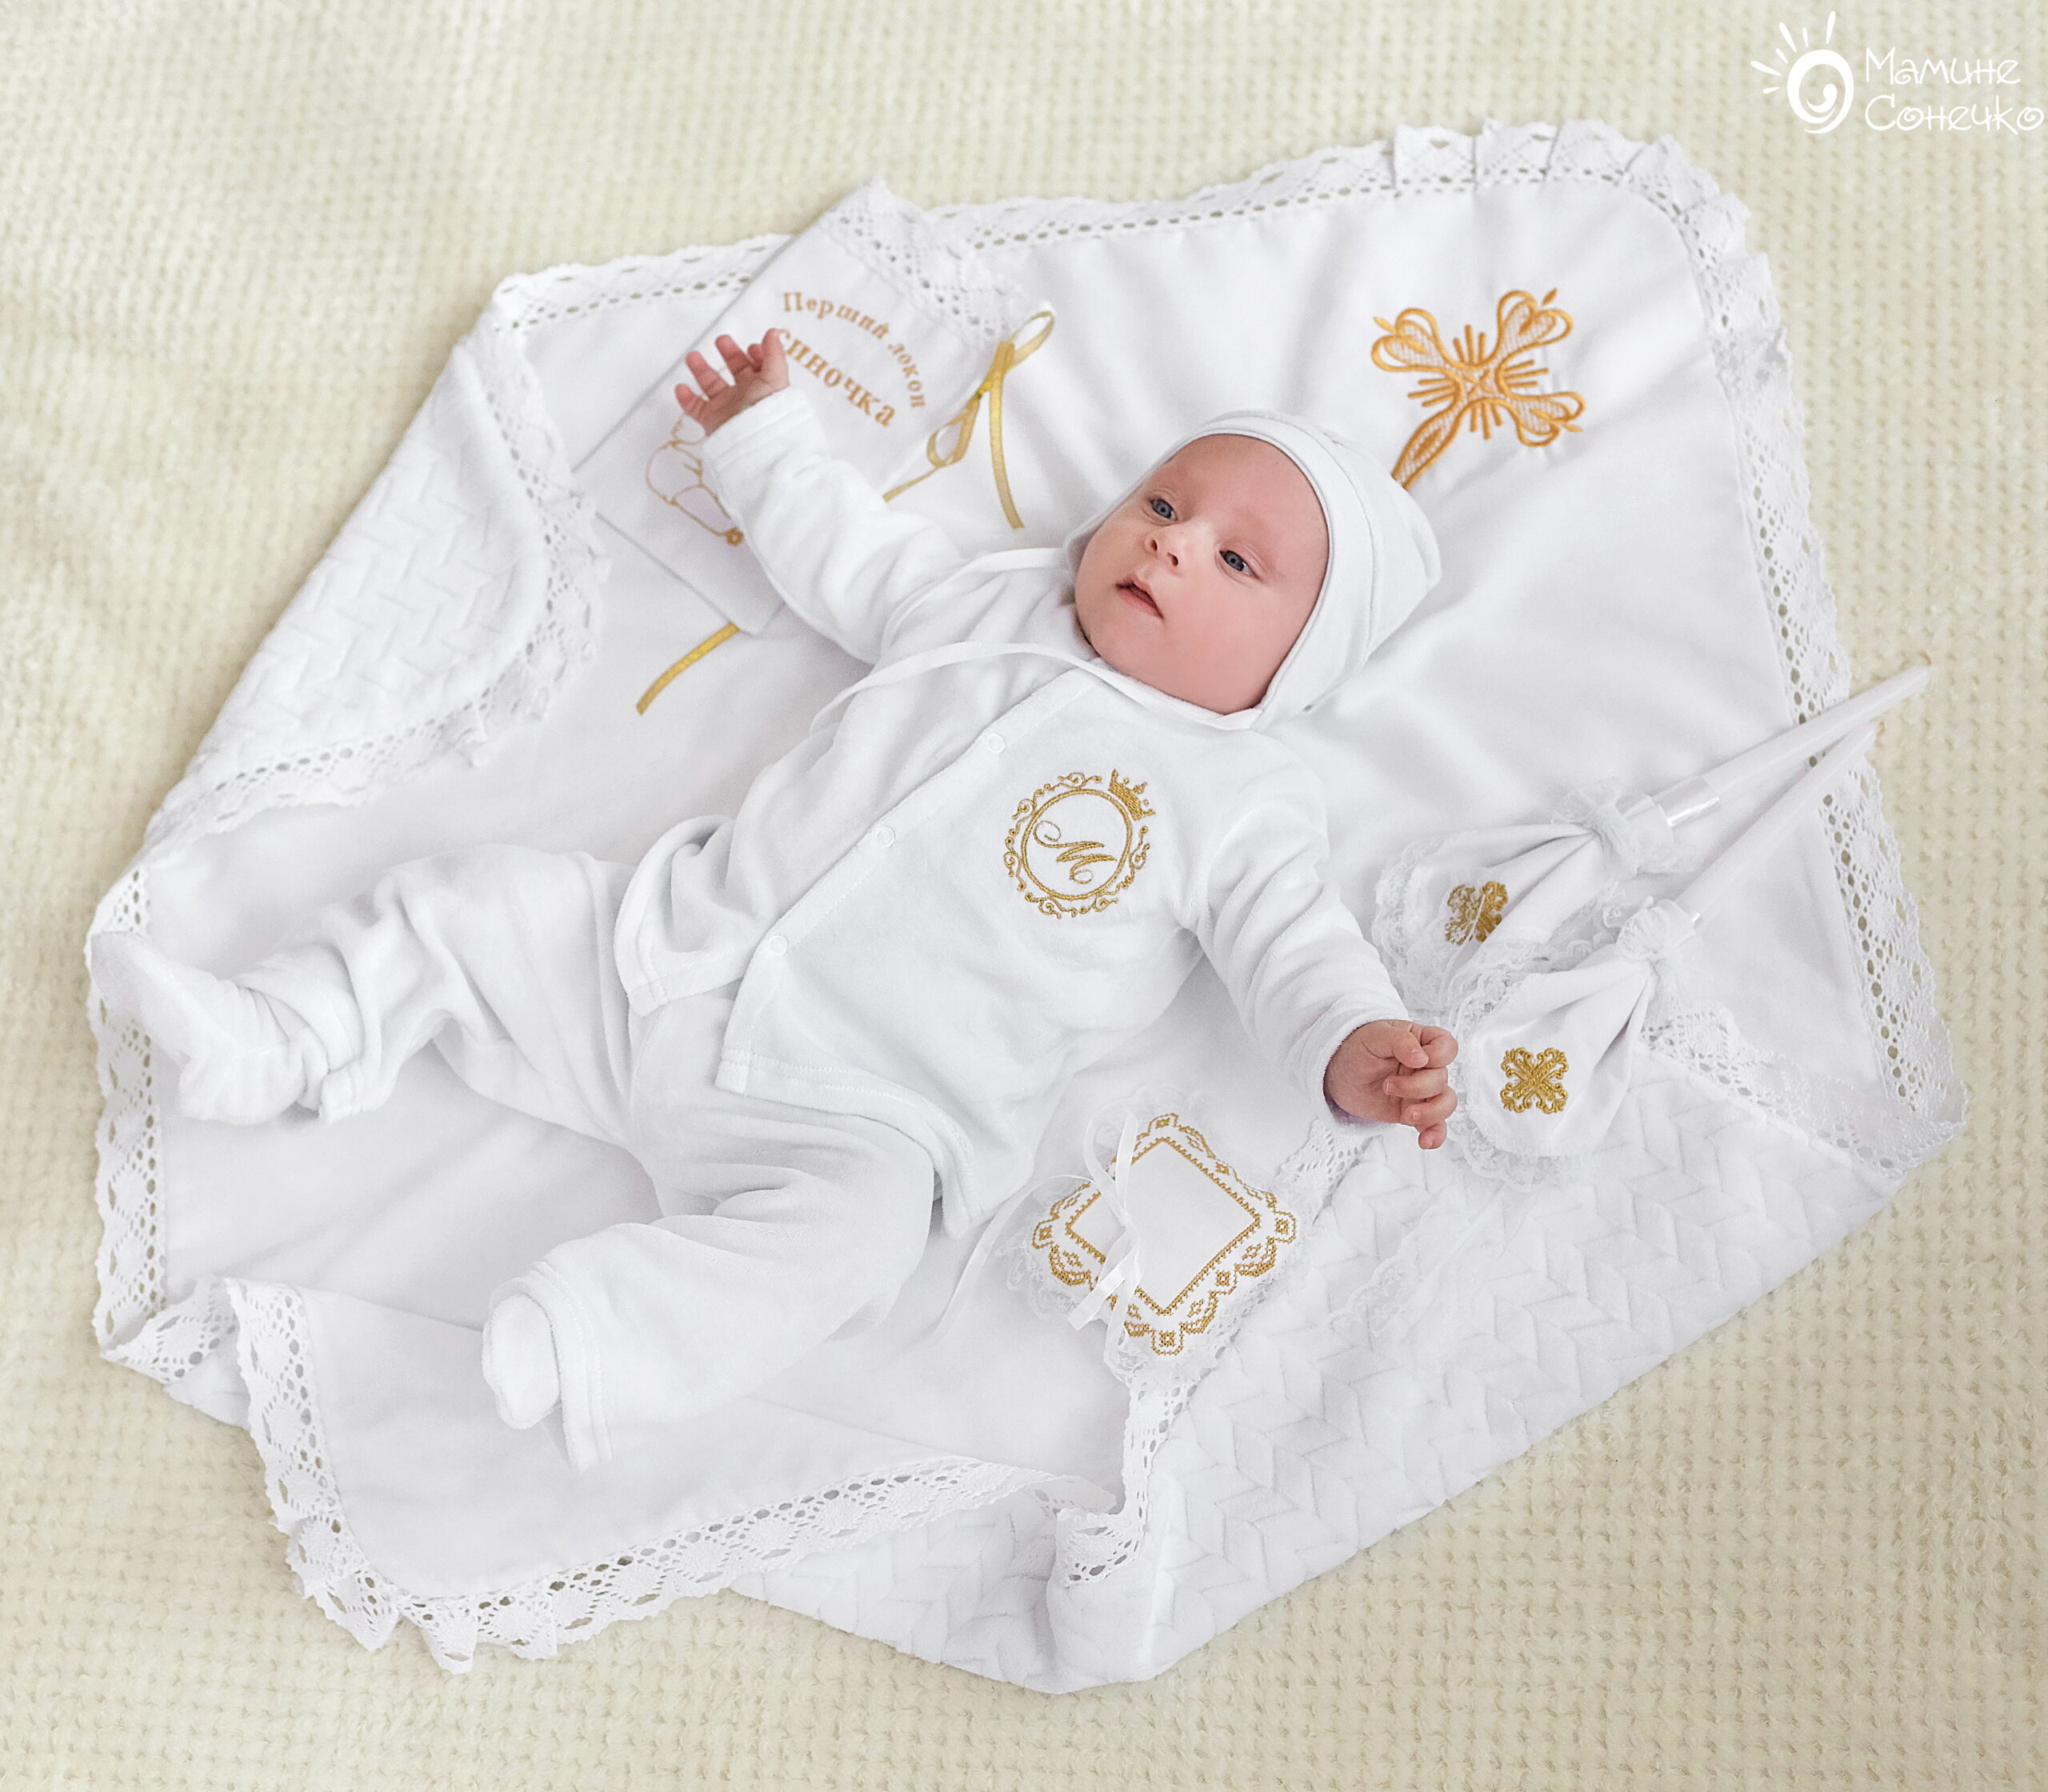 Complete set for baptism of a boy “Prince initial gold”, velour